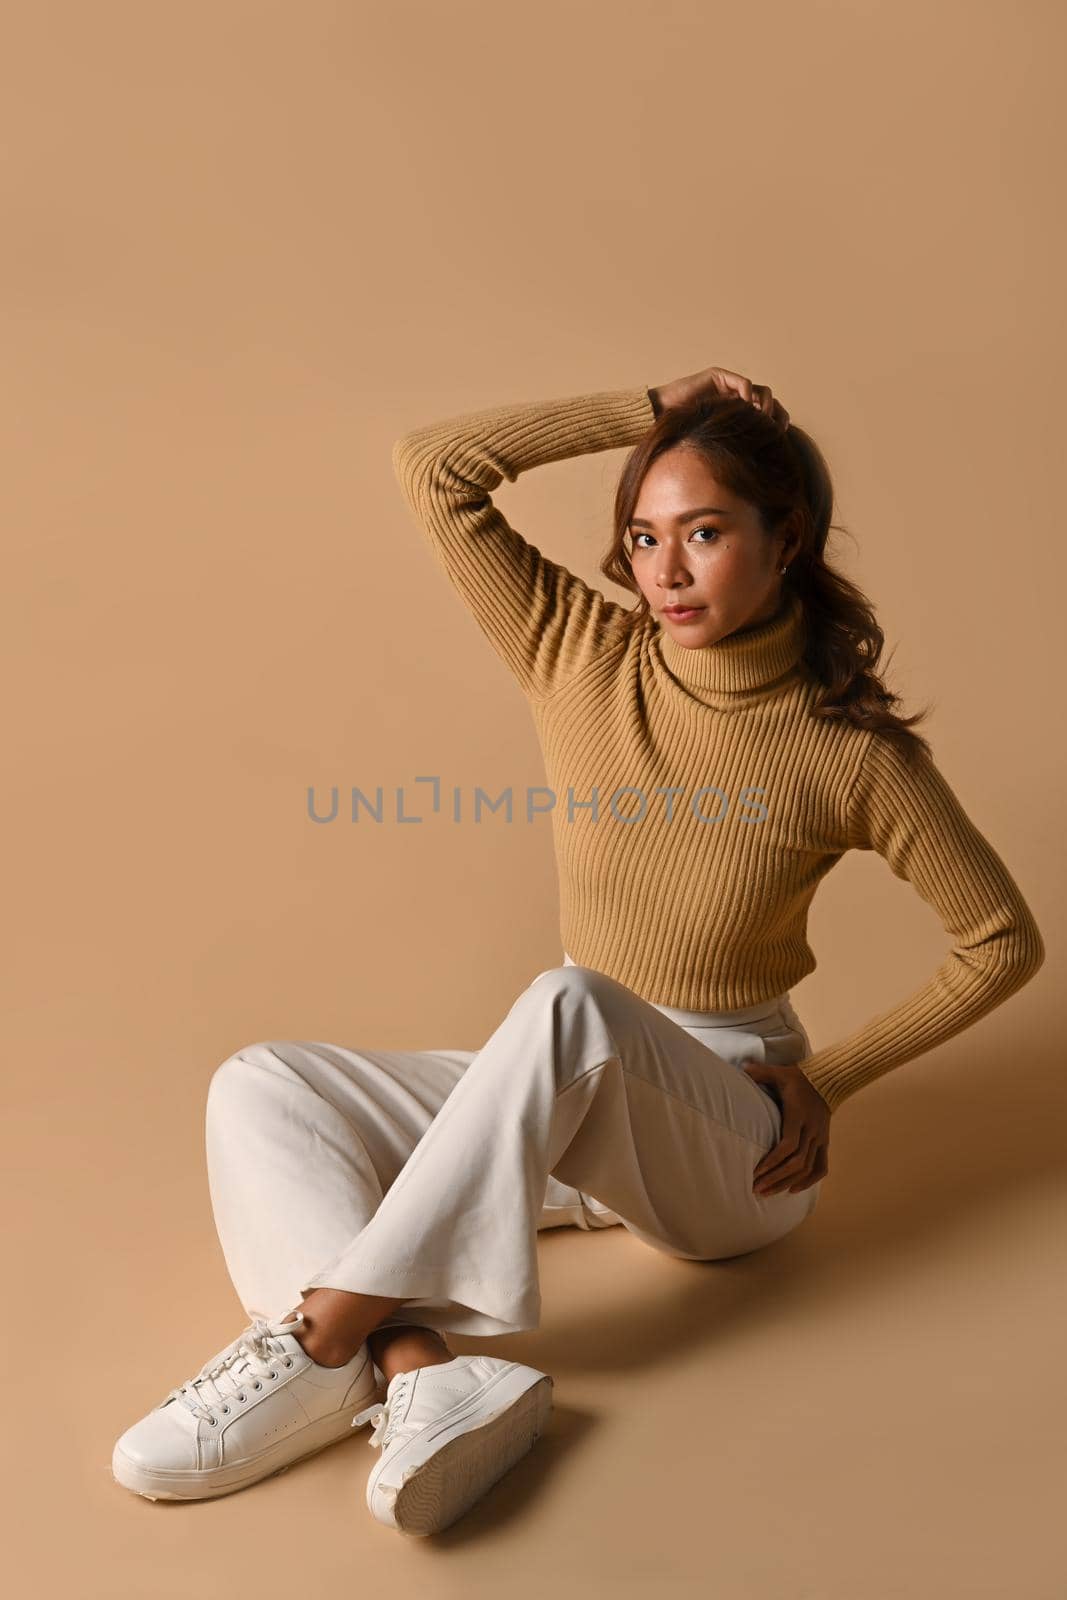 Beautiful fashionable woman in autumn outfit posing on beige background. Fashion studio photo, Autumn fashion and beauty concept by prathanchorruangsak